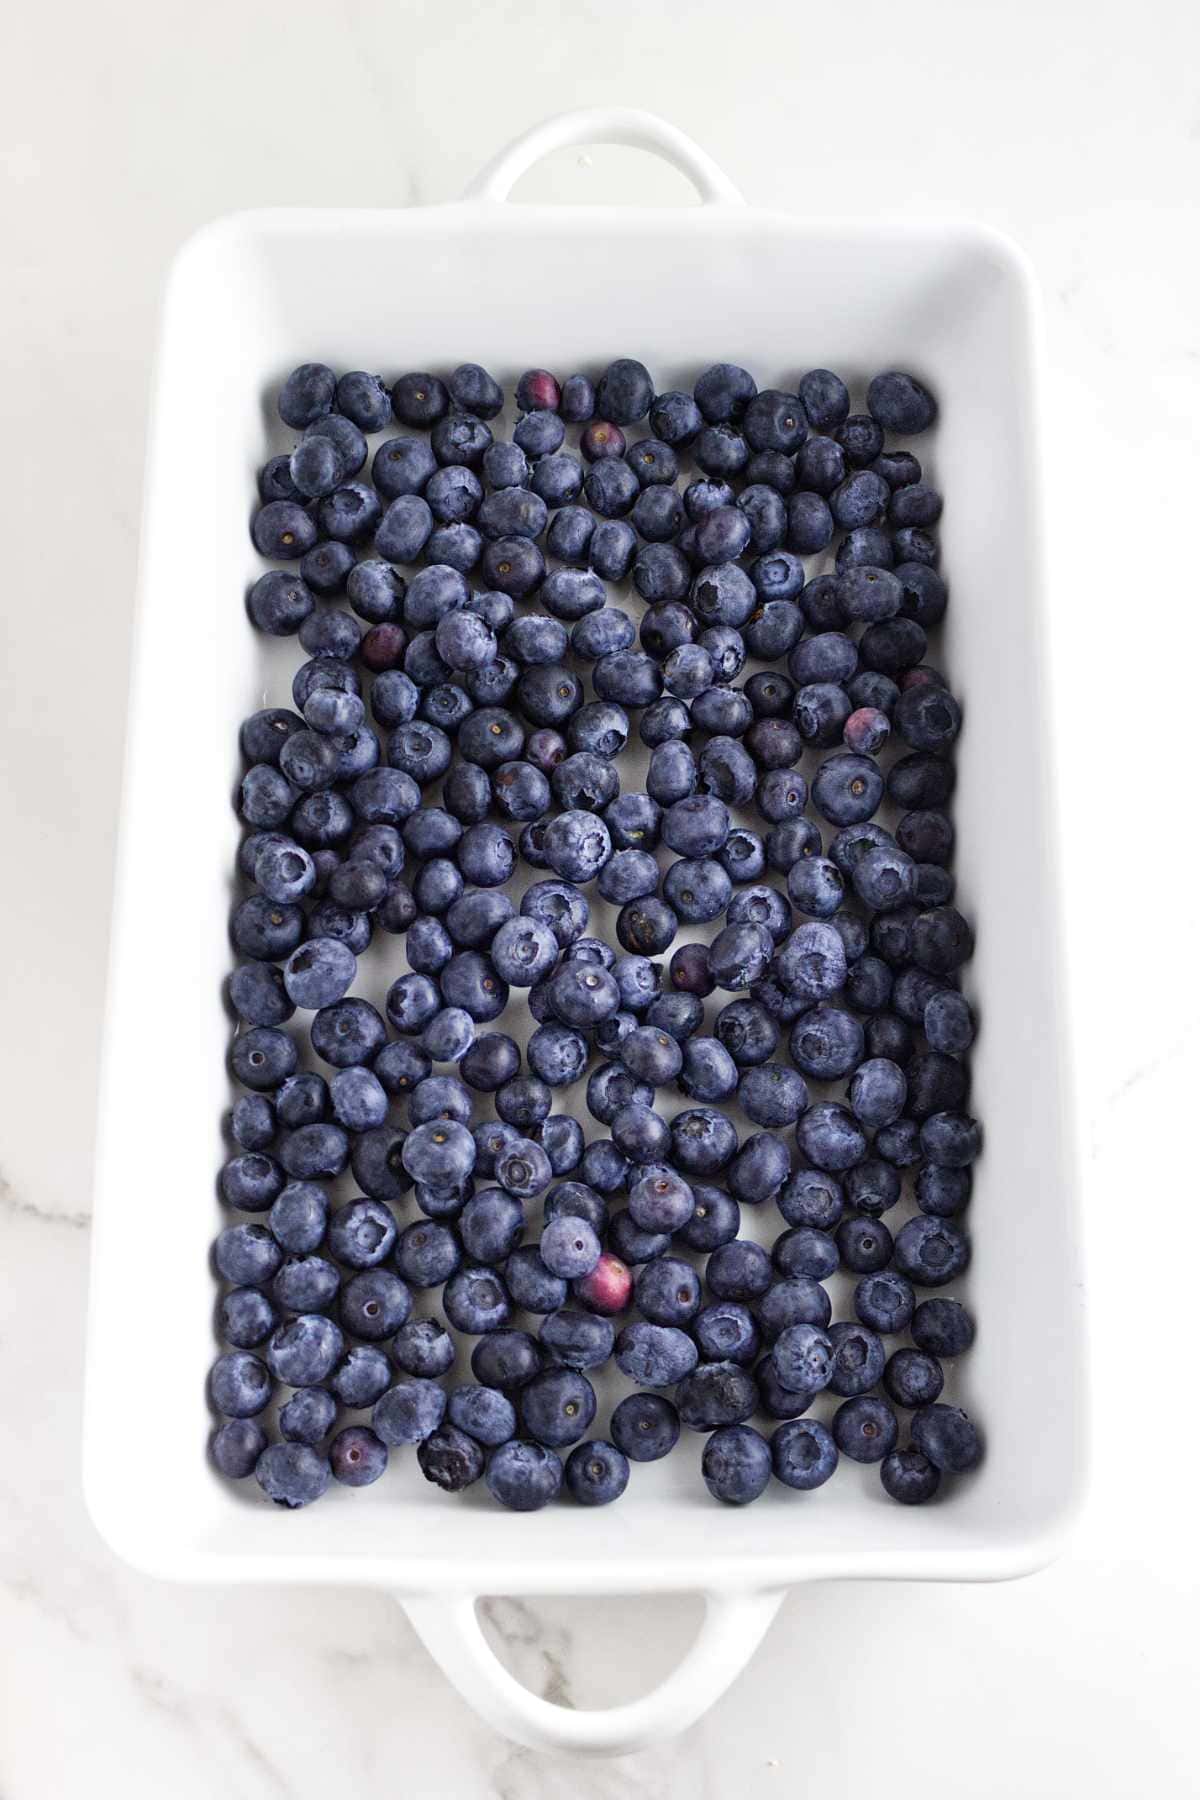 fresh blueberries in a baking dish.